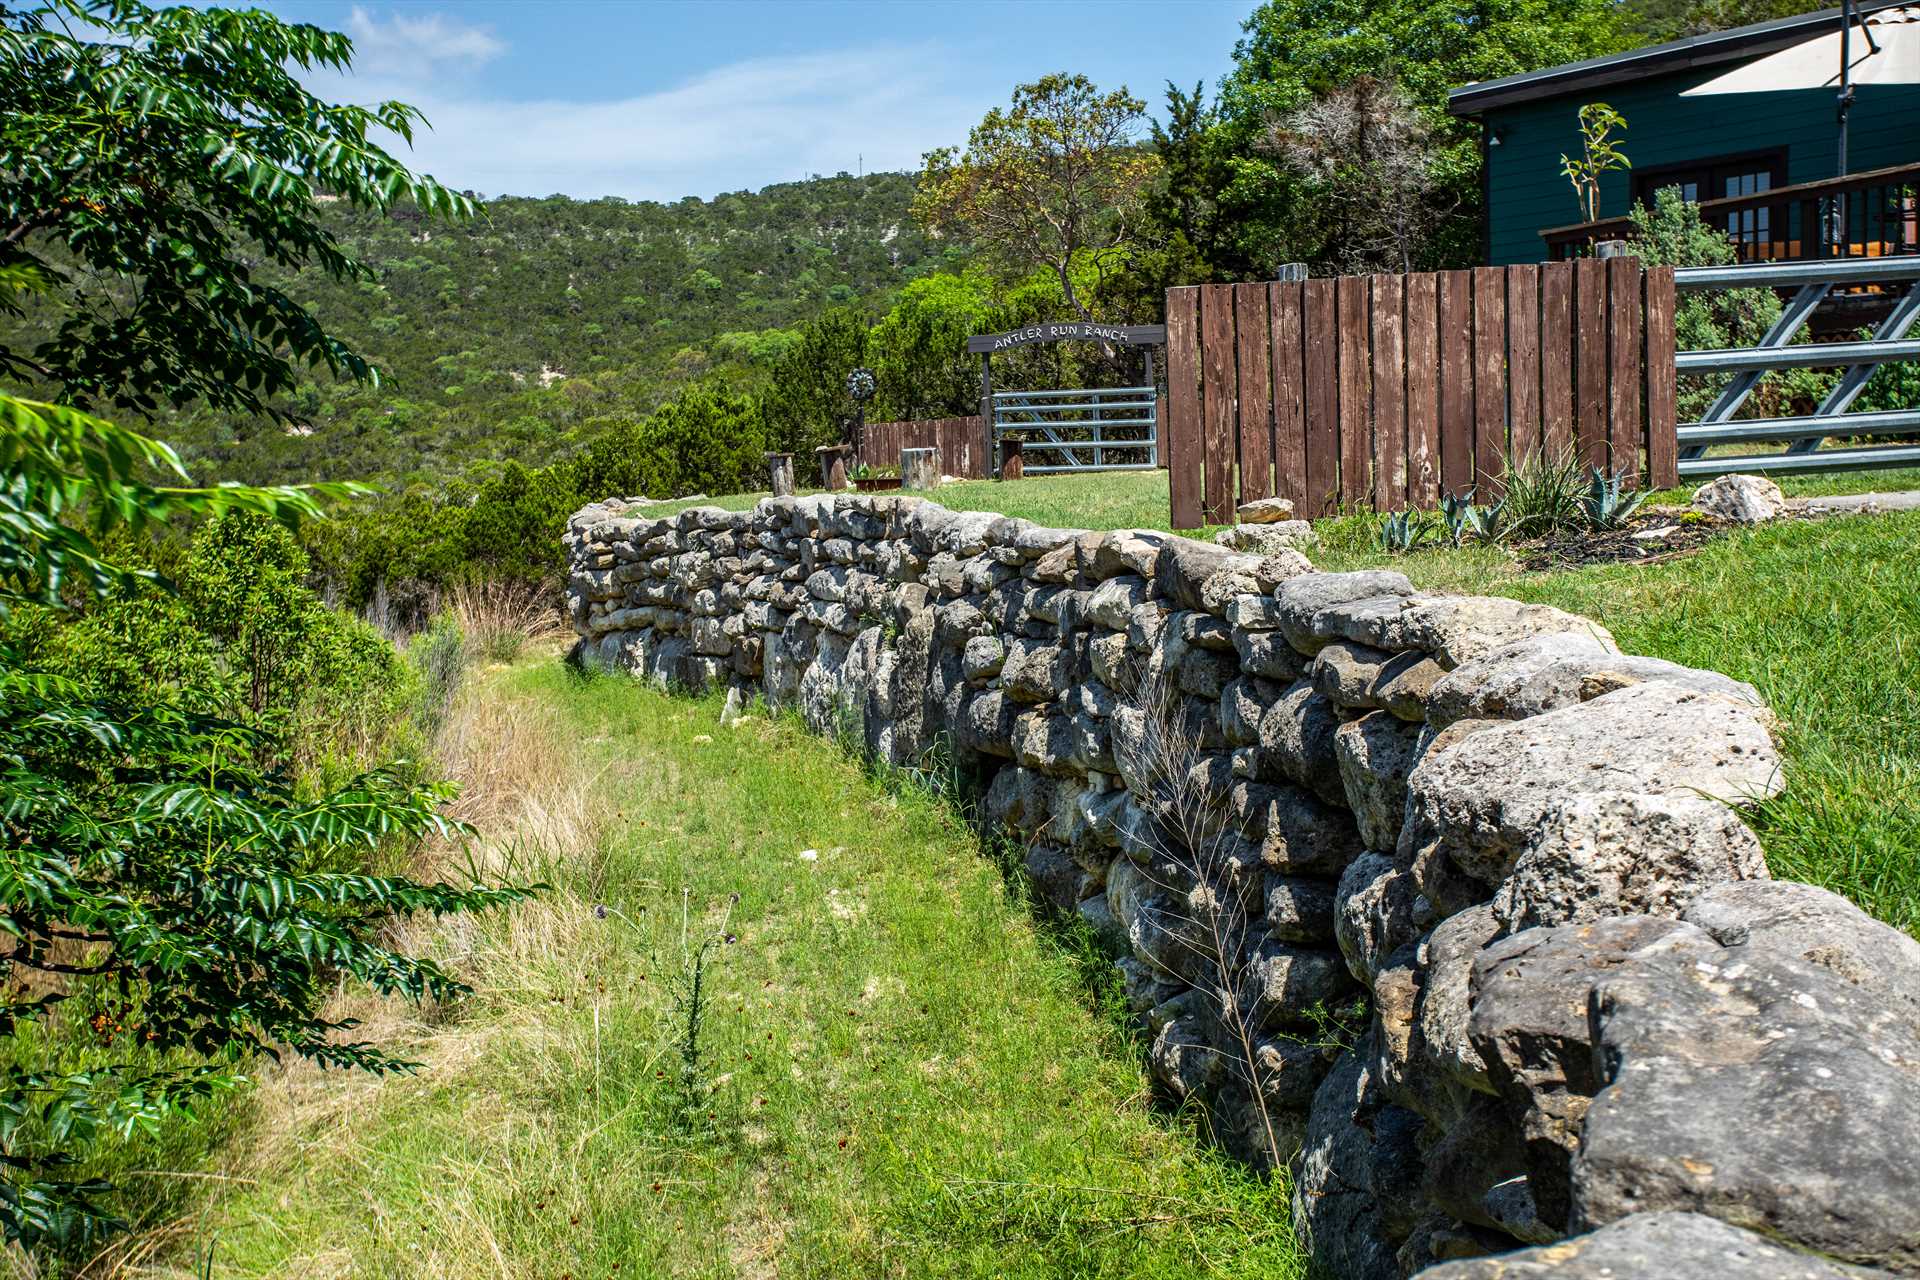                                                 This functional and decorative stone wall is just one of the hundreds of places you'll find at Antler Run Ranch for memorable vacation photos!